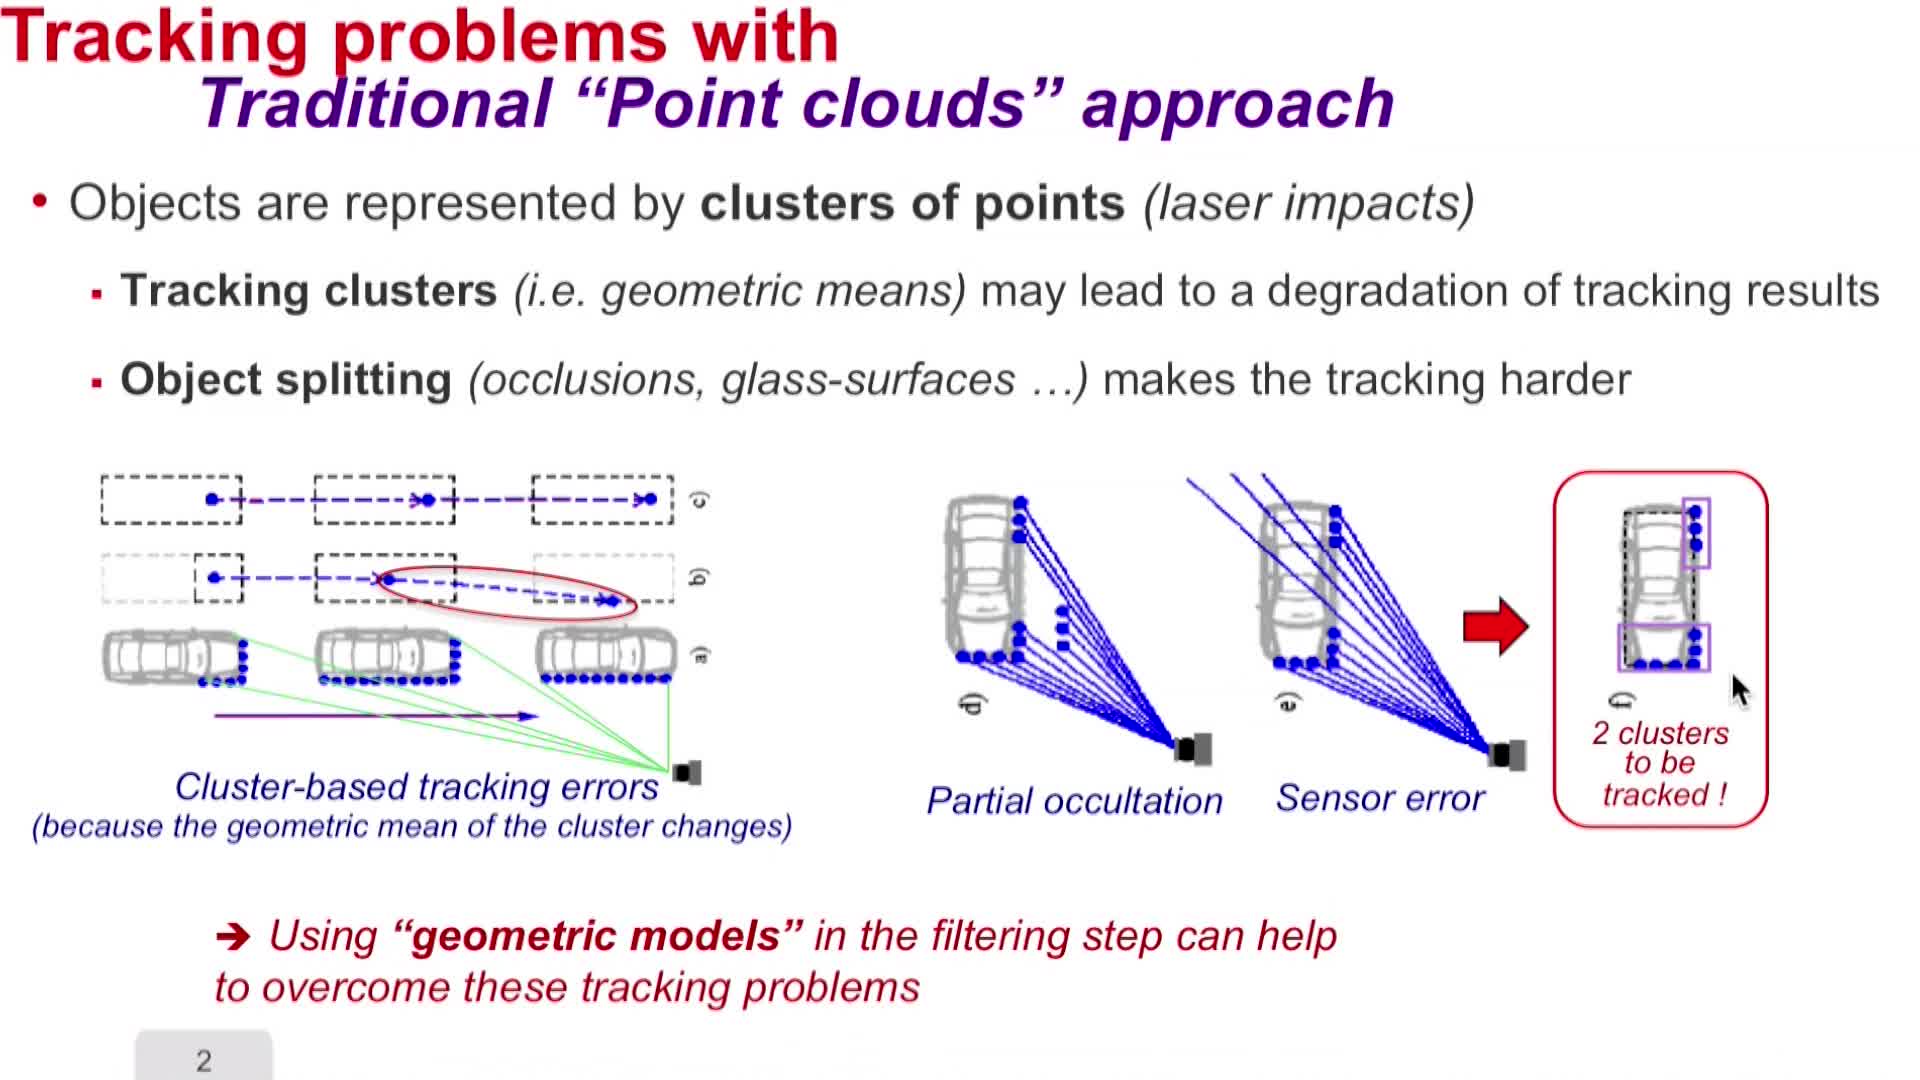 4.6. Detection and Tracking of Mobile Objects – Model & Grid based approaches